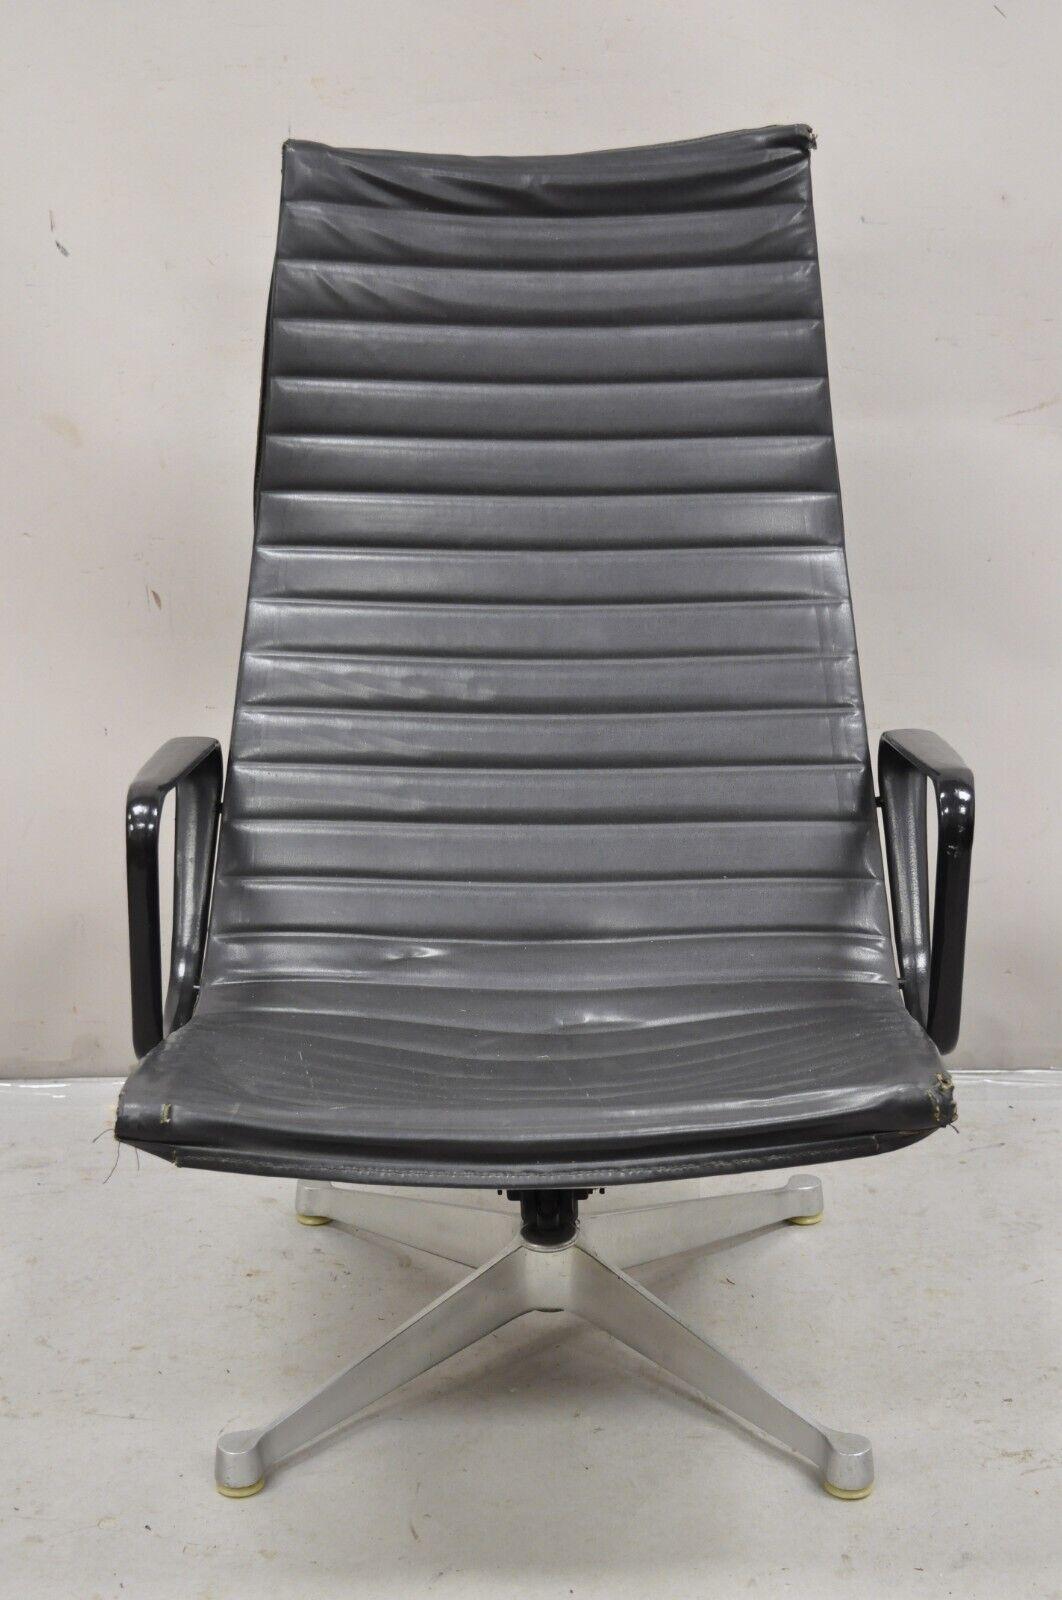 Vintage Herman Miller Charles and Ray Eames Design Swivel Aluminum Group Chair. Circa Late 20th Century. Measurements: 40